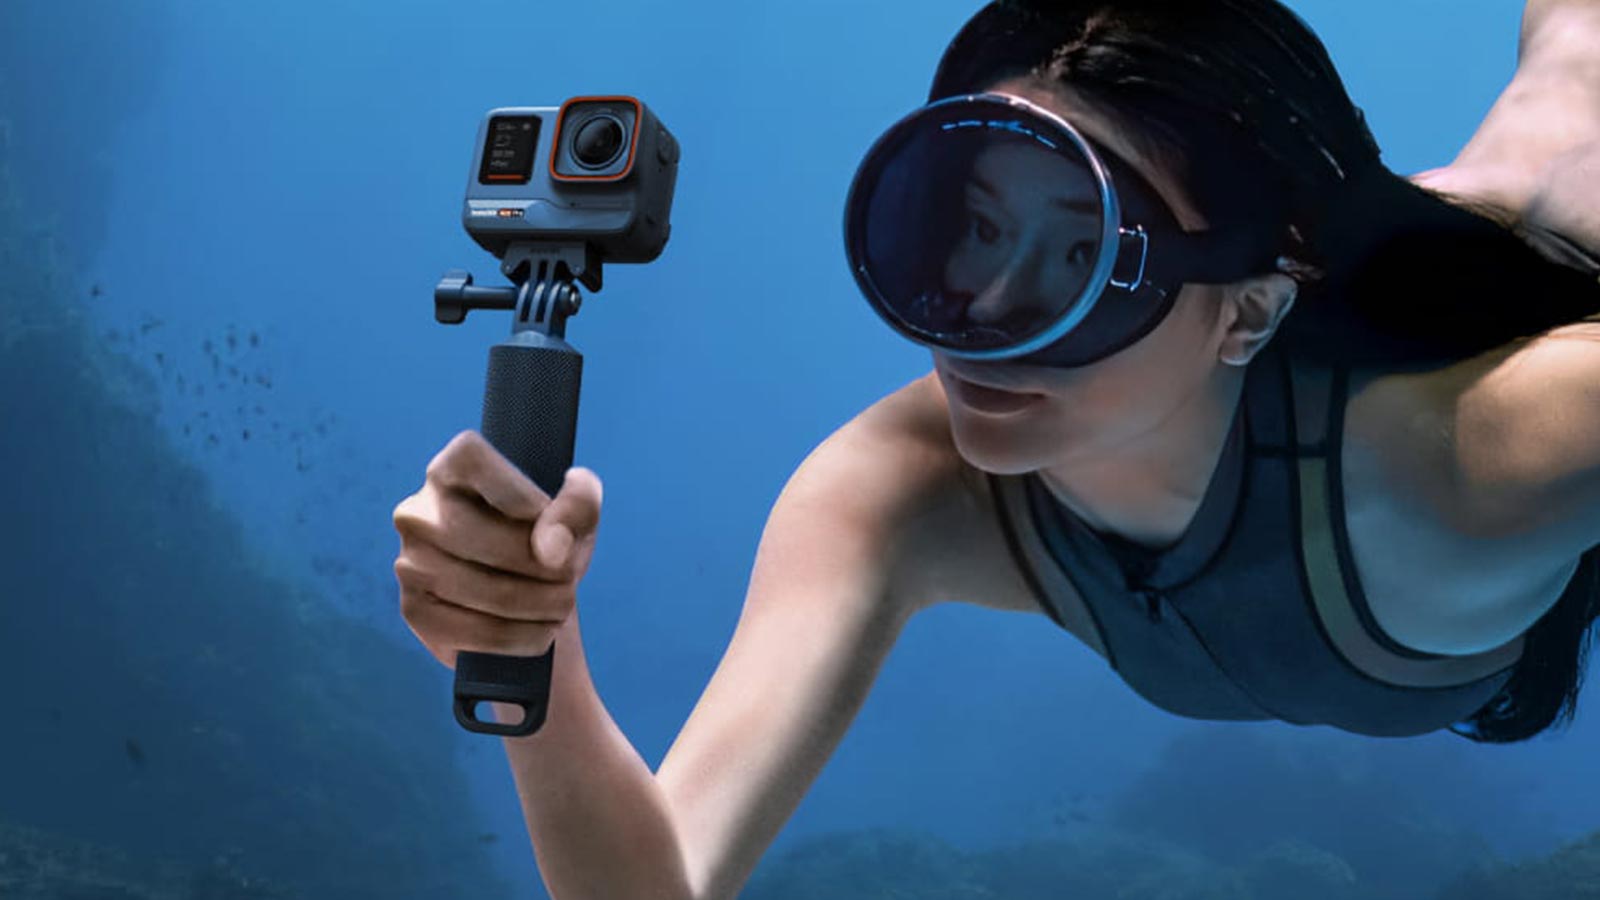 Insta360 Ace Pro review: This next-gen action camera sets the bar